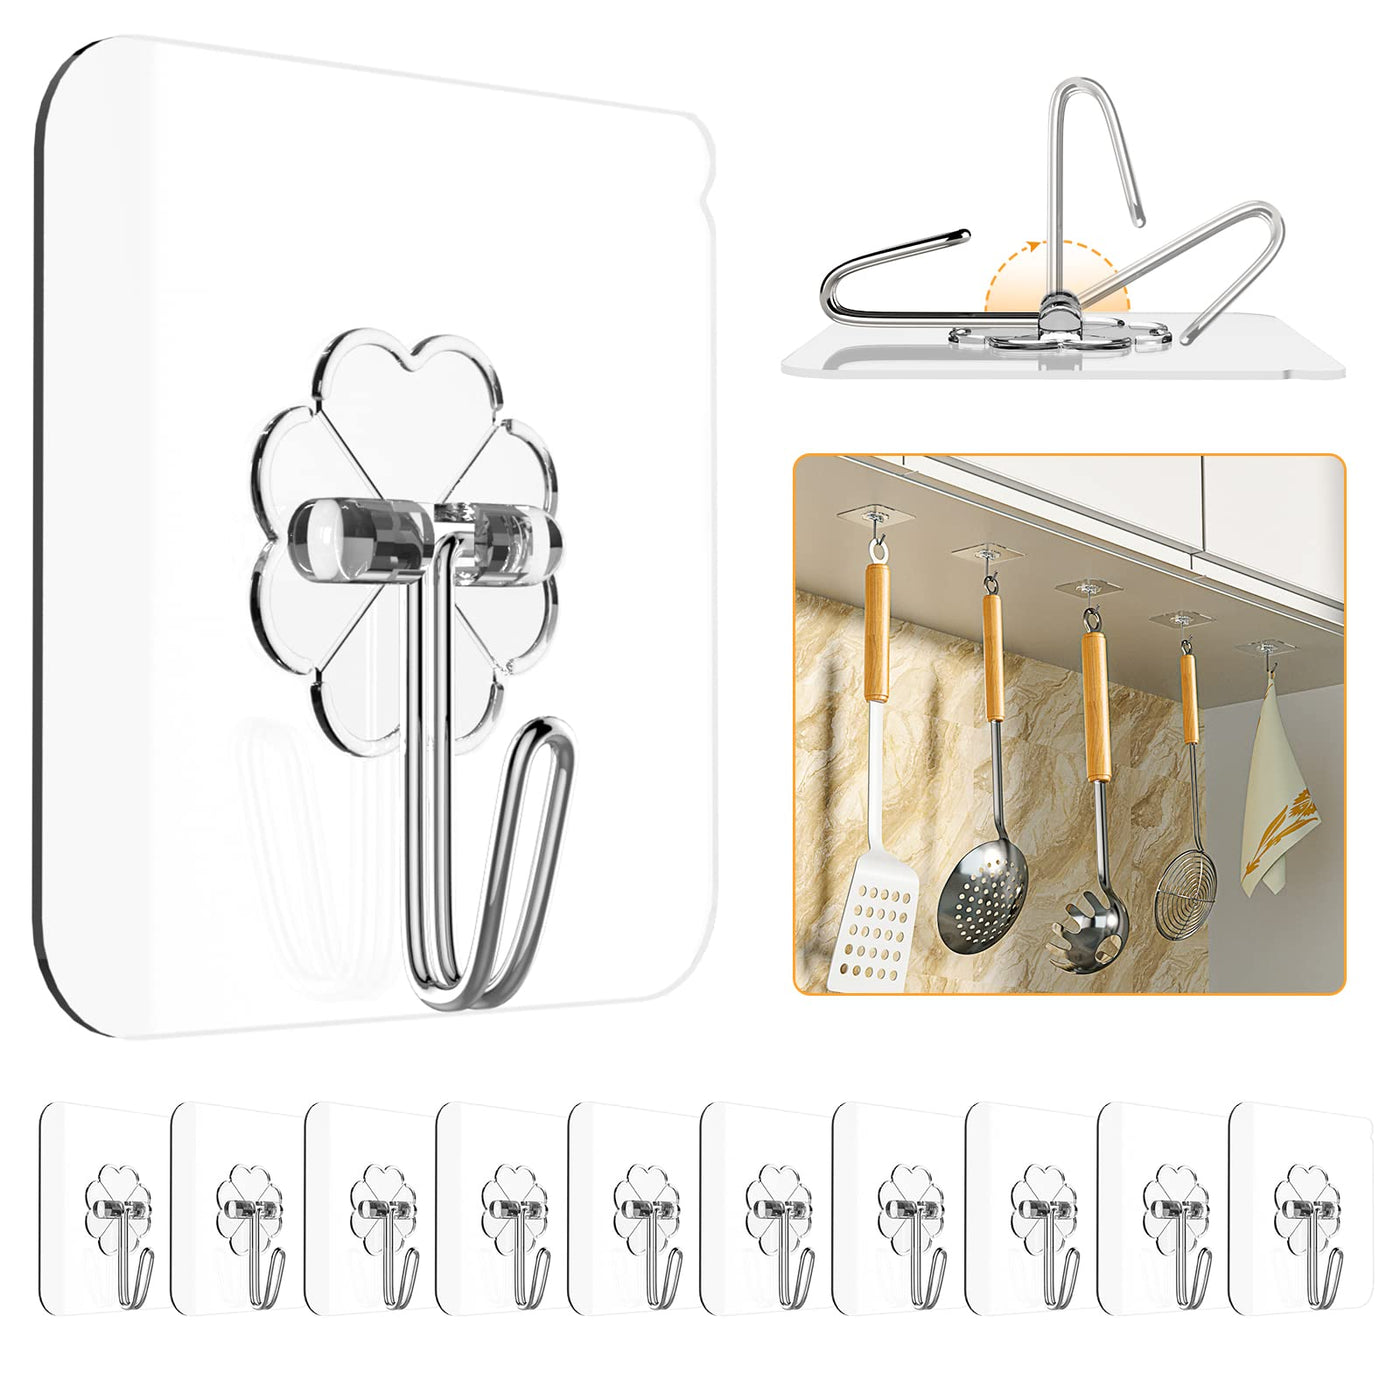 probebi Adhesive Hooks for Hanging Heavy Duty - 12 Pack Wall Hooks  13lb(Max), Sticky Hooks Waterproof, Wall Hangers Without Nails, Kitchen  Hooks, Bathroom Hooks, Indoor Use for Home & Office